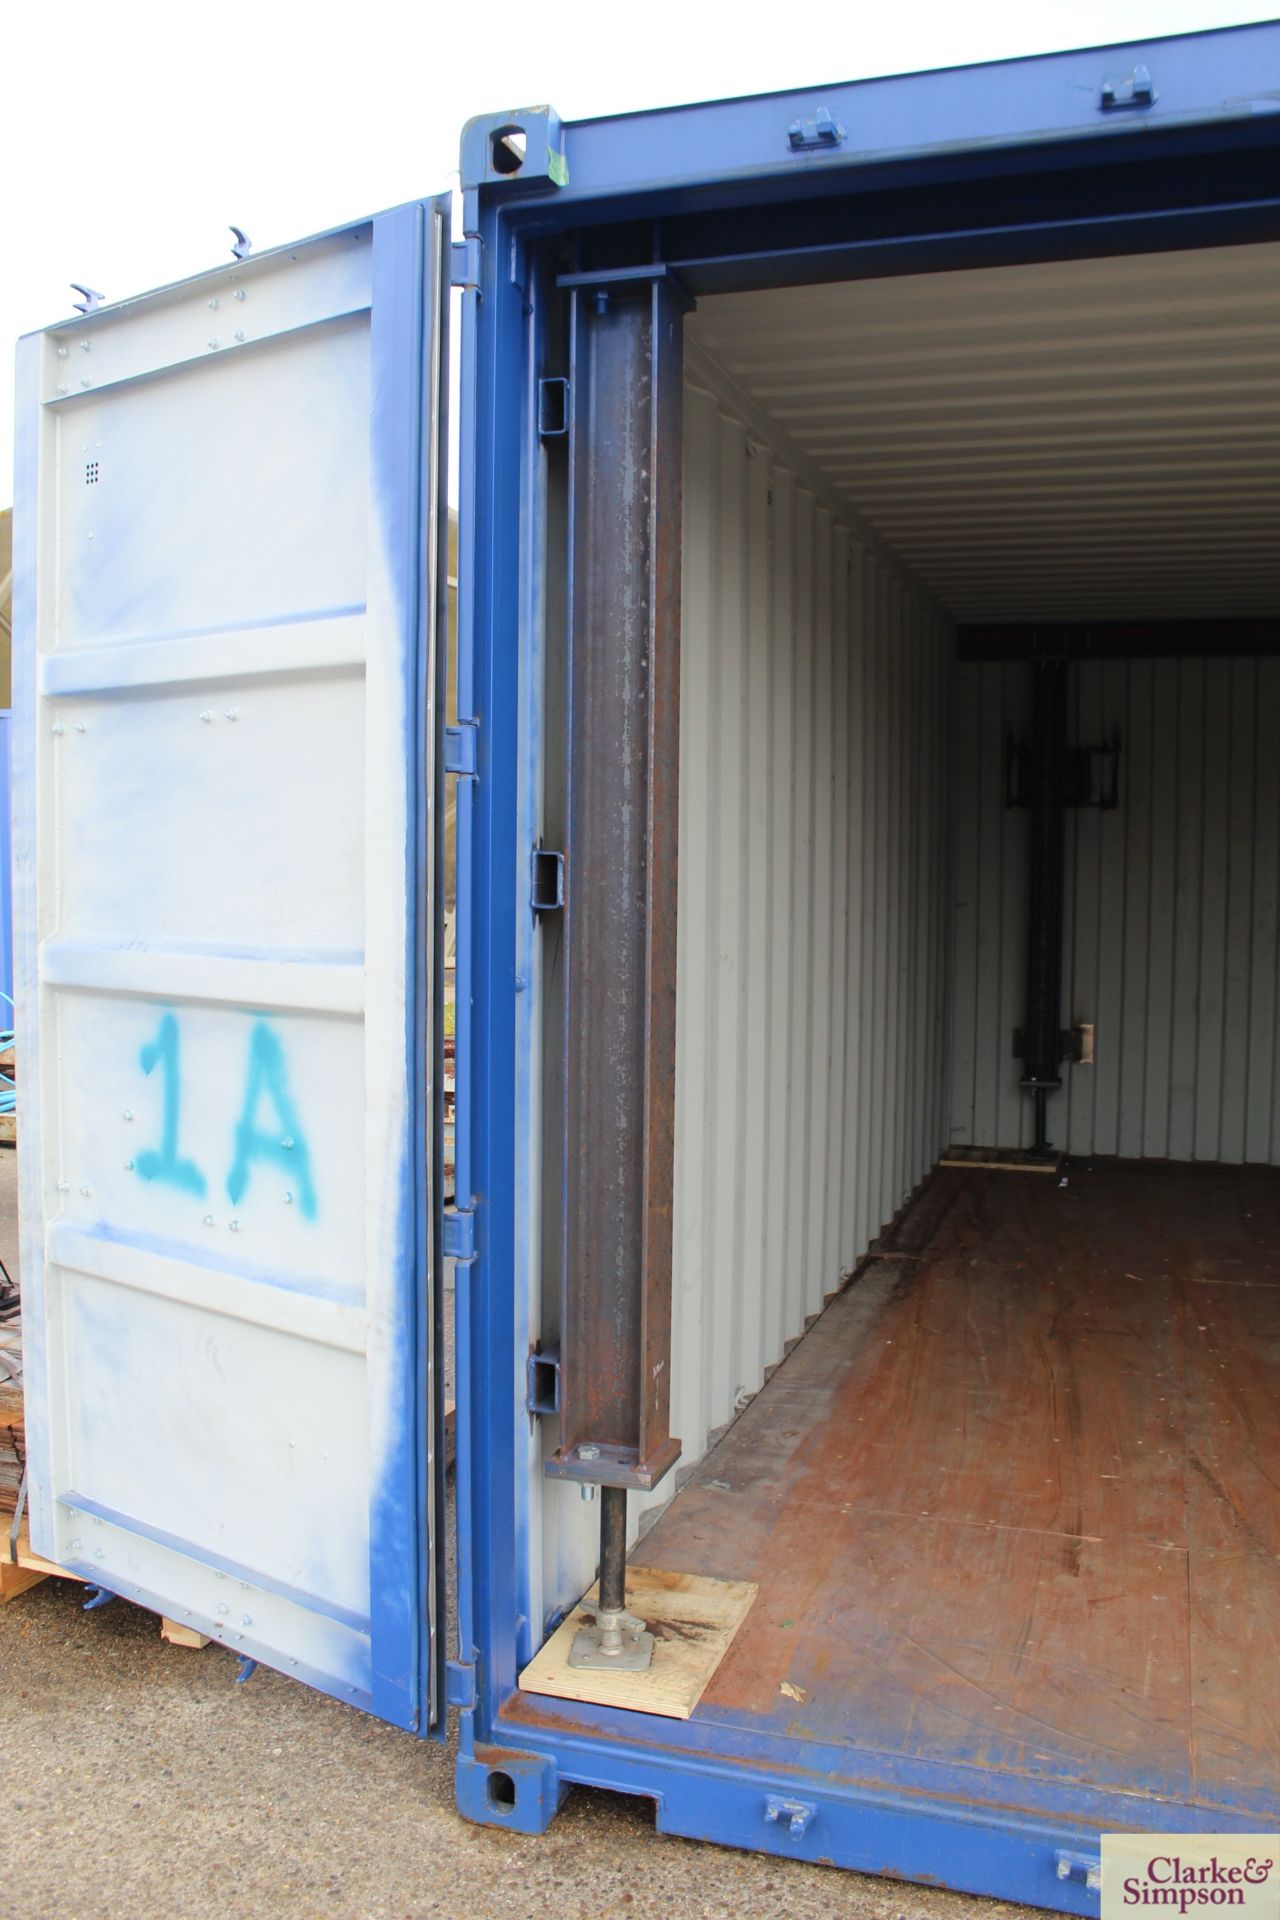 20ft x 9ft6in high shipping container. 2019. Partially reinforced to interior to include plates - Image 10 of 19